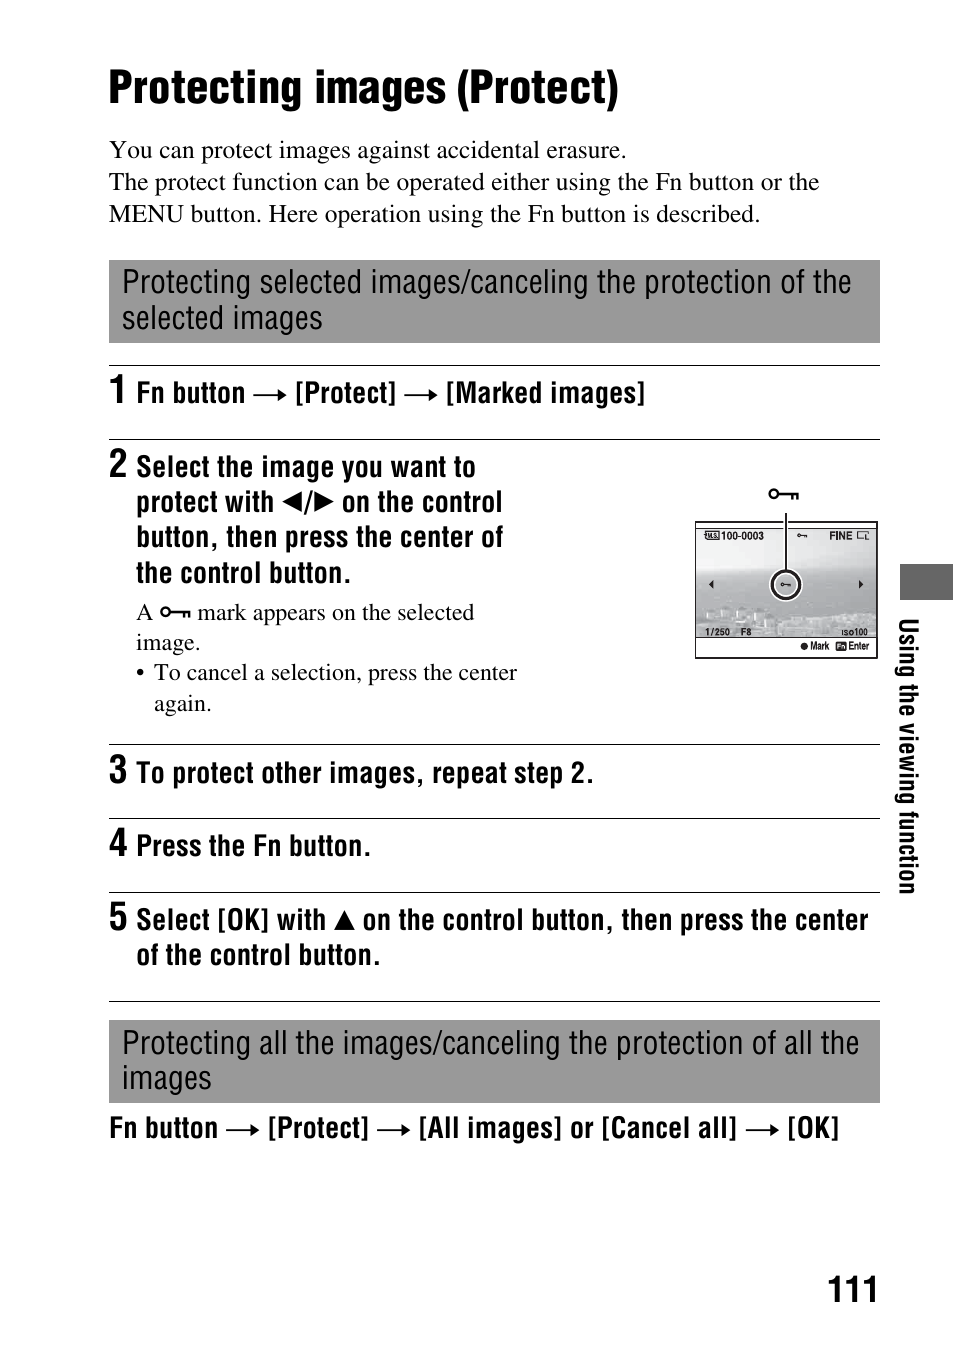 Protecting images (protect), Protect (111) | Sony DSLR-A330 User Manual | Page 111 / 171